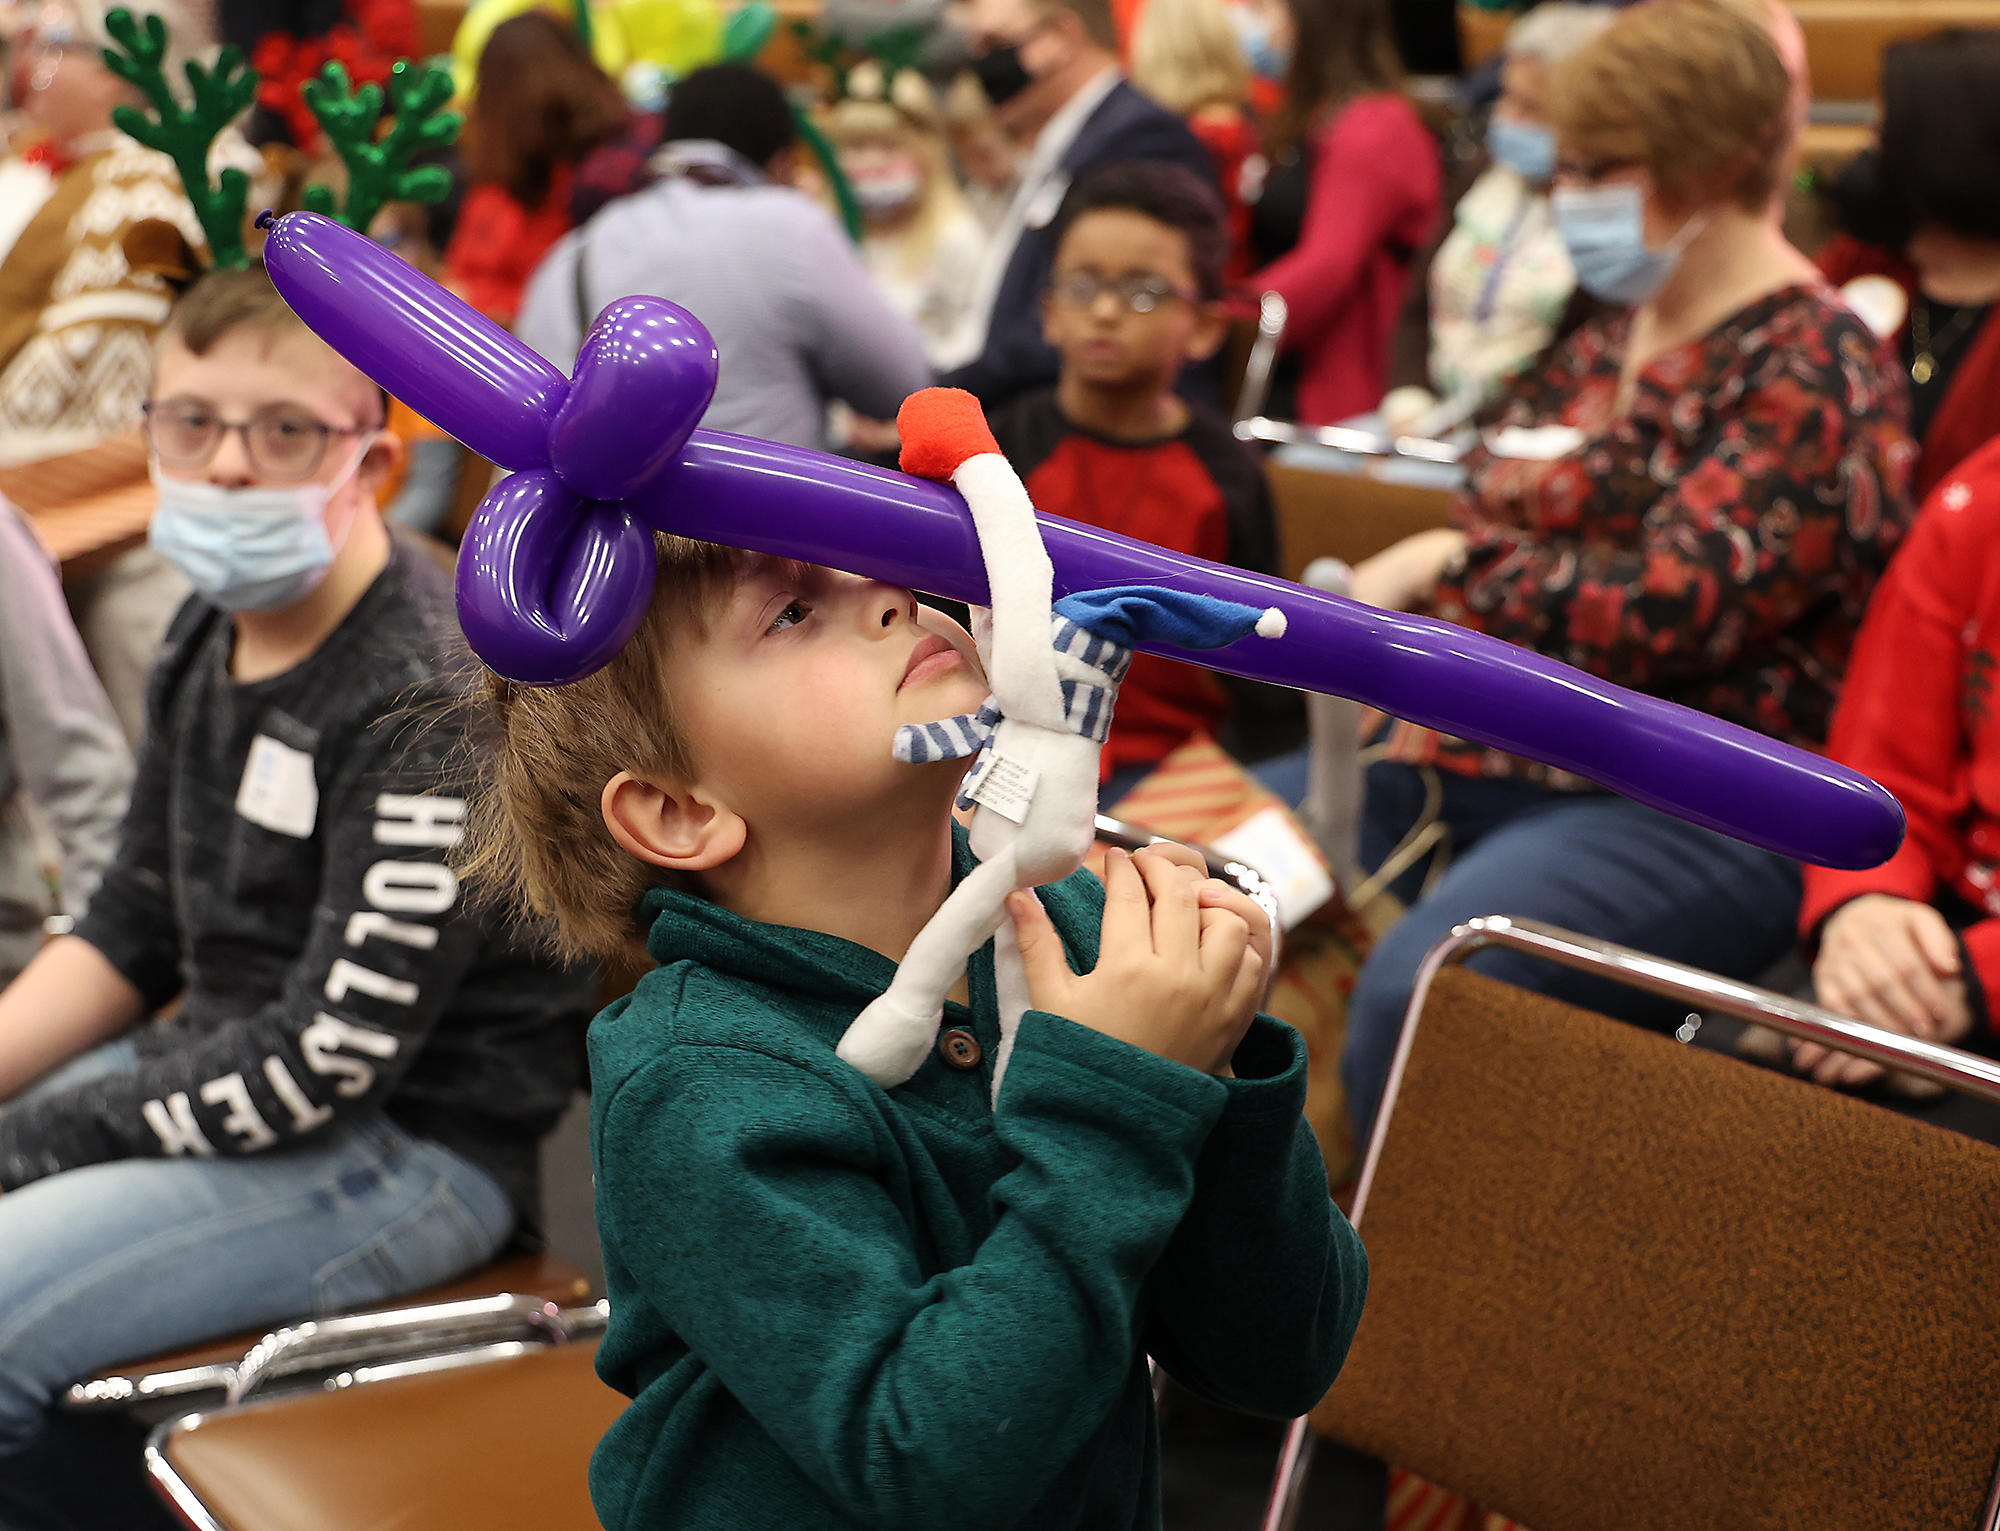 PHOTOS: Rotary makes sure children have a Merry Christmas